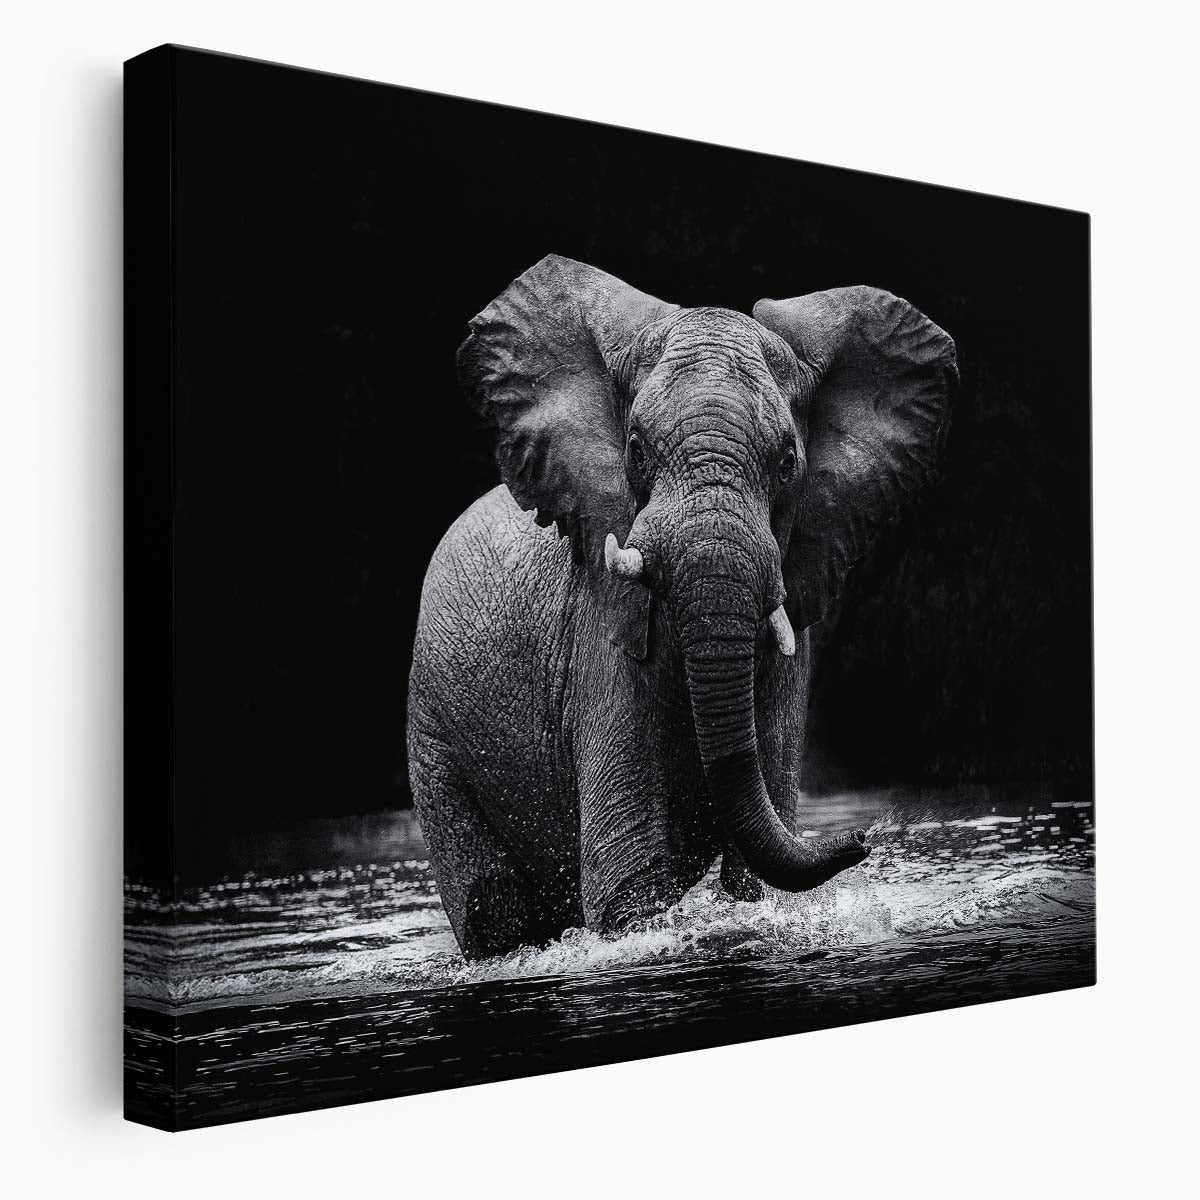 Monochrome Elephant Swimming Kafue River Wall Art by Luxuriance Designs. Made in USA.